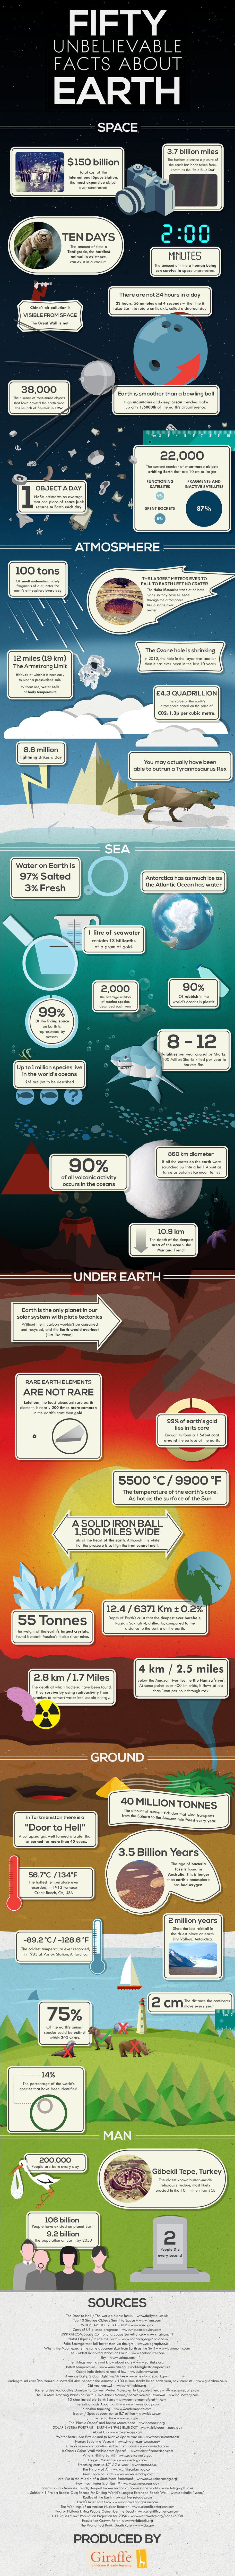 earth_facts_infographic